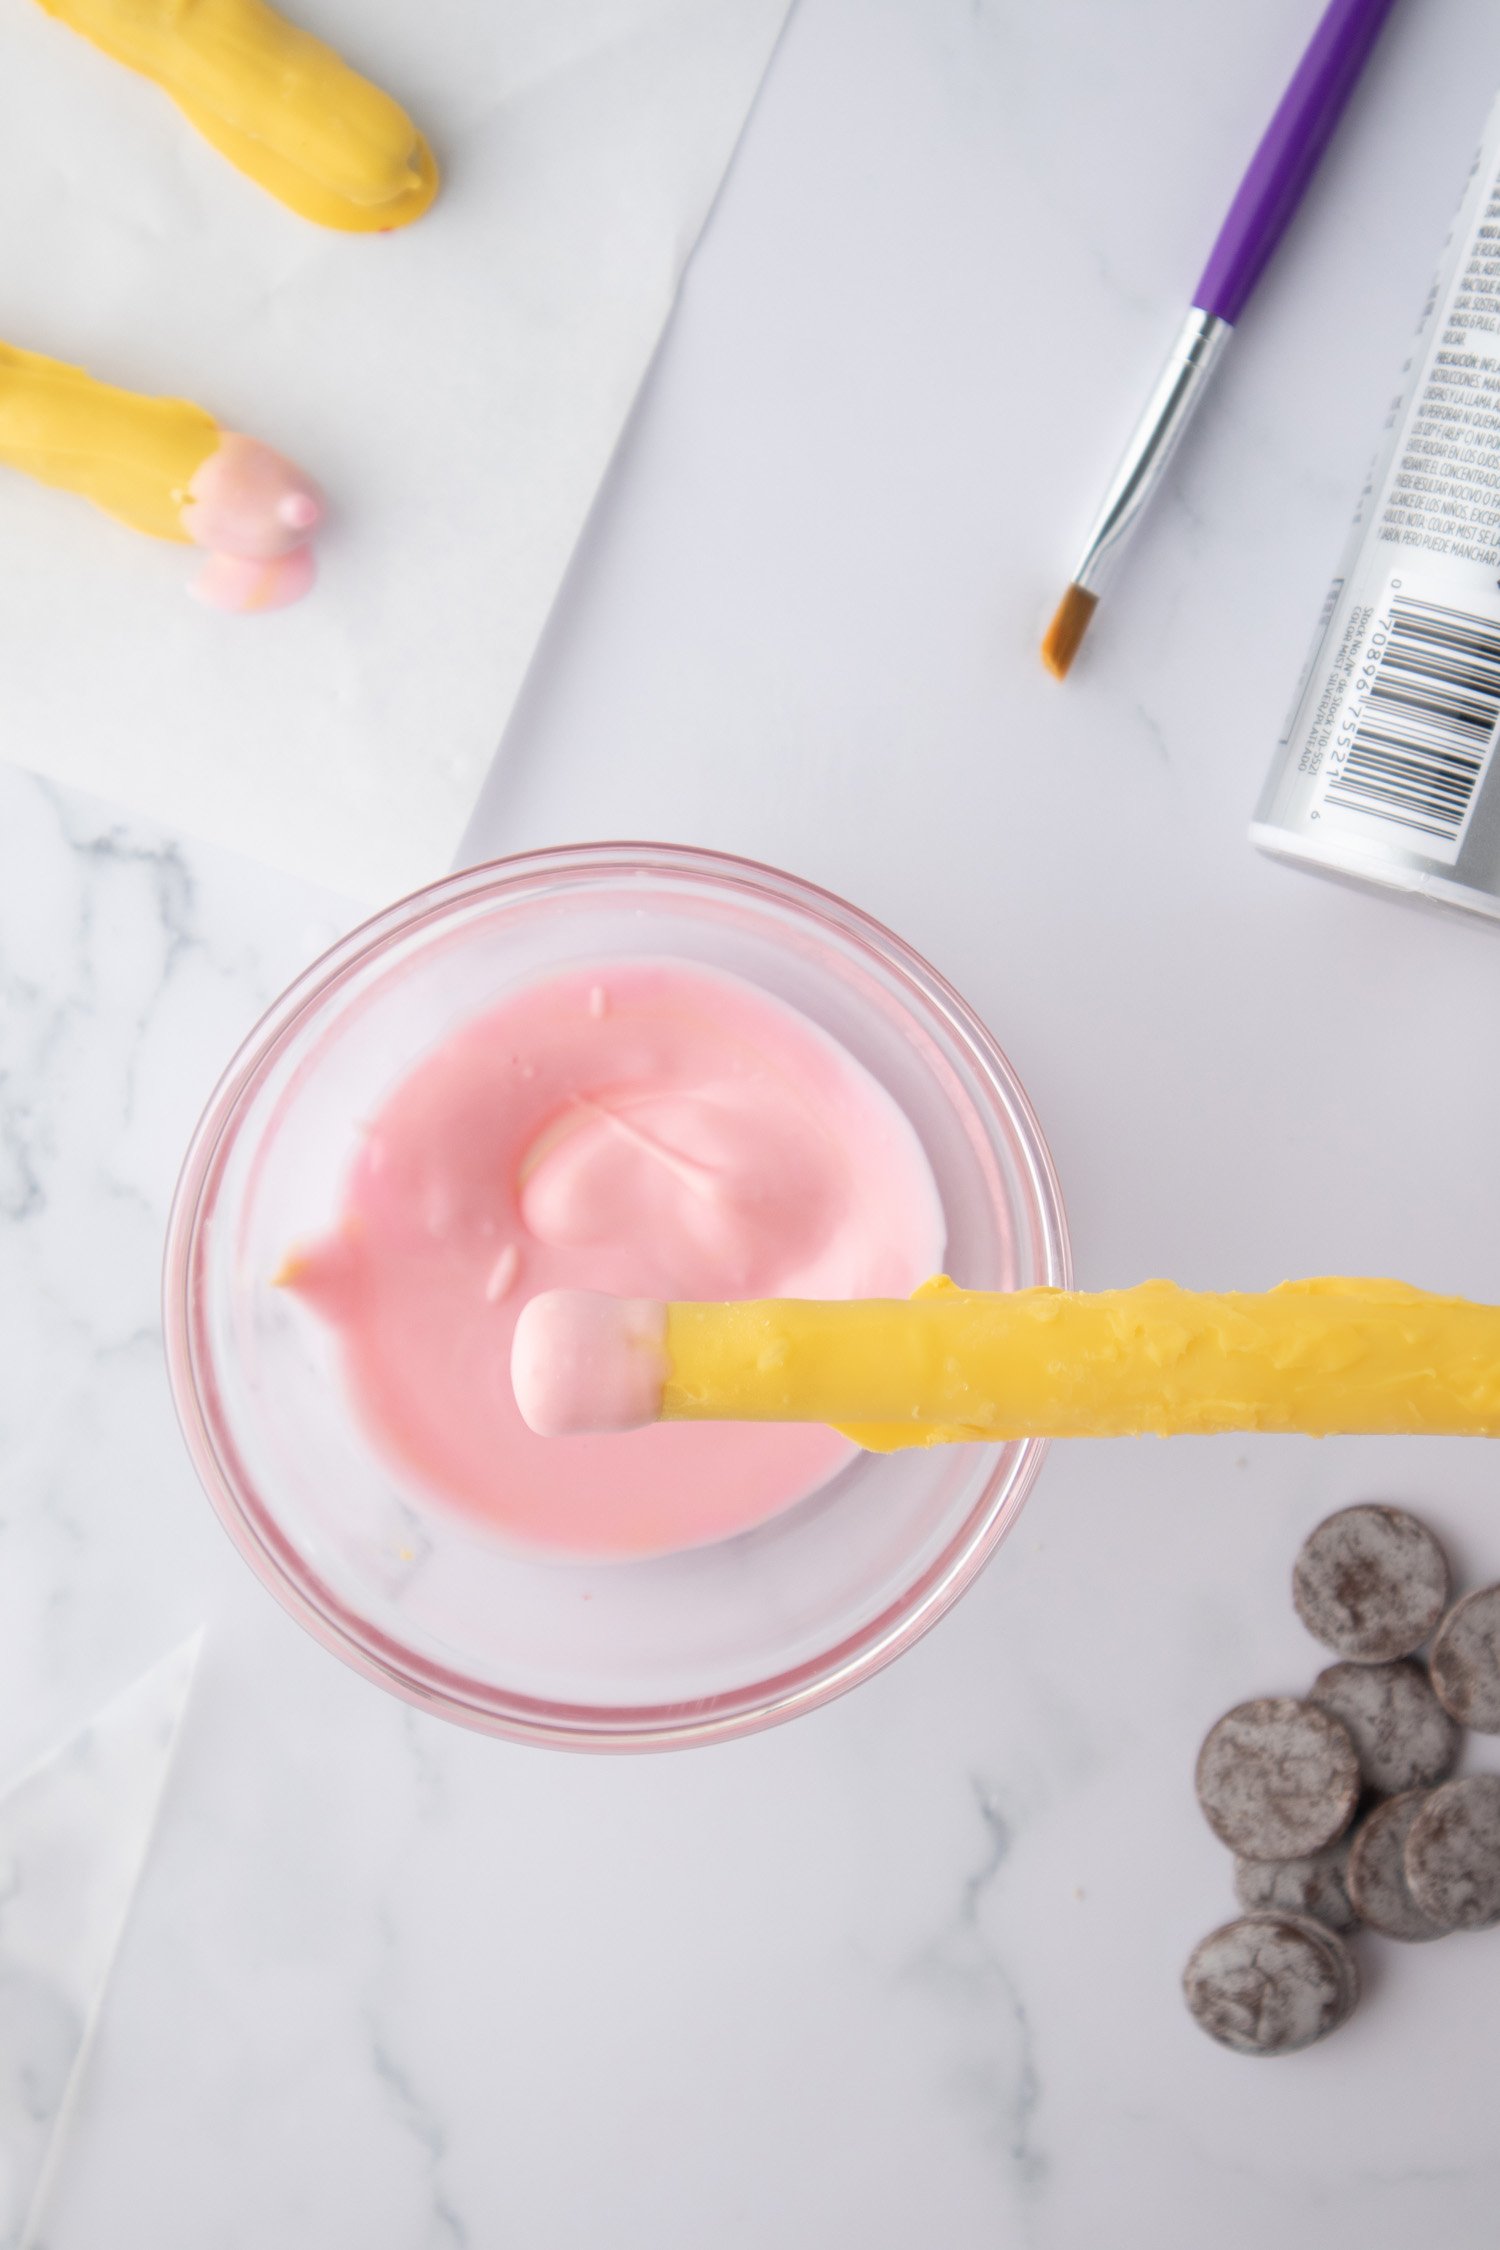 dipping yellow pencil snack end into pink melted chocolate